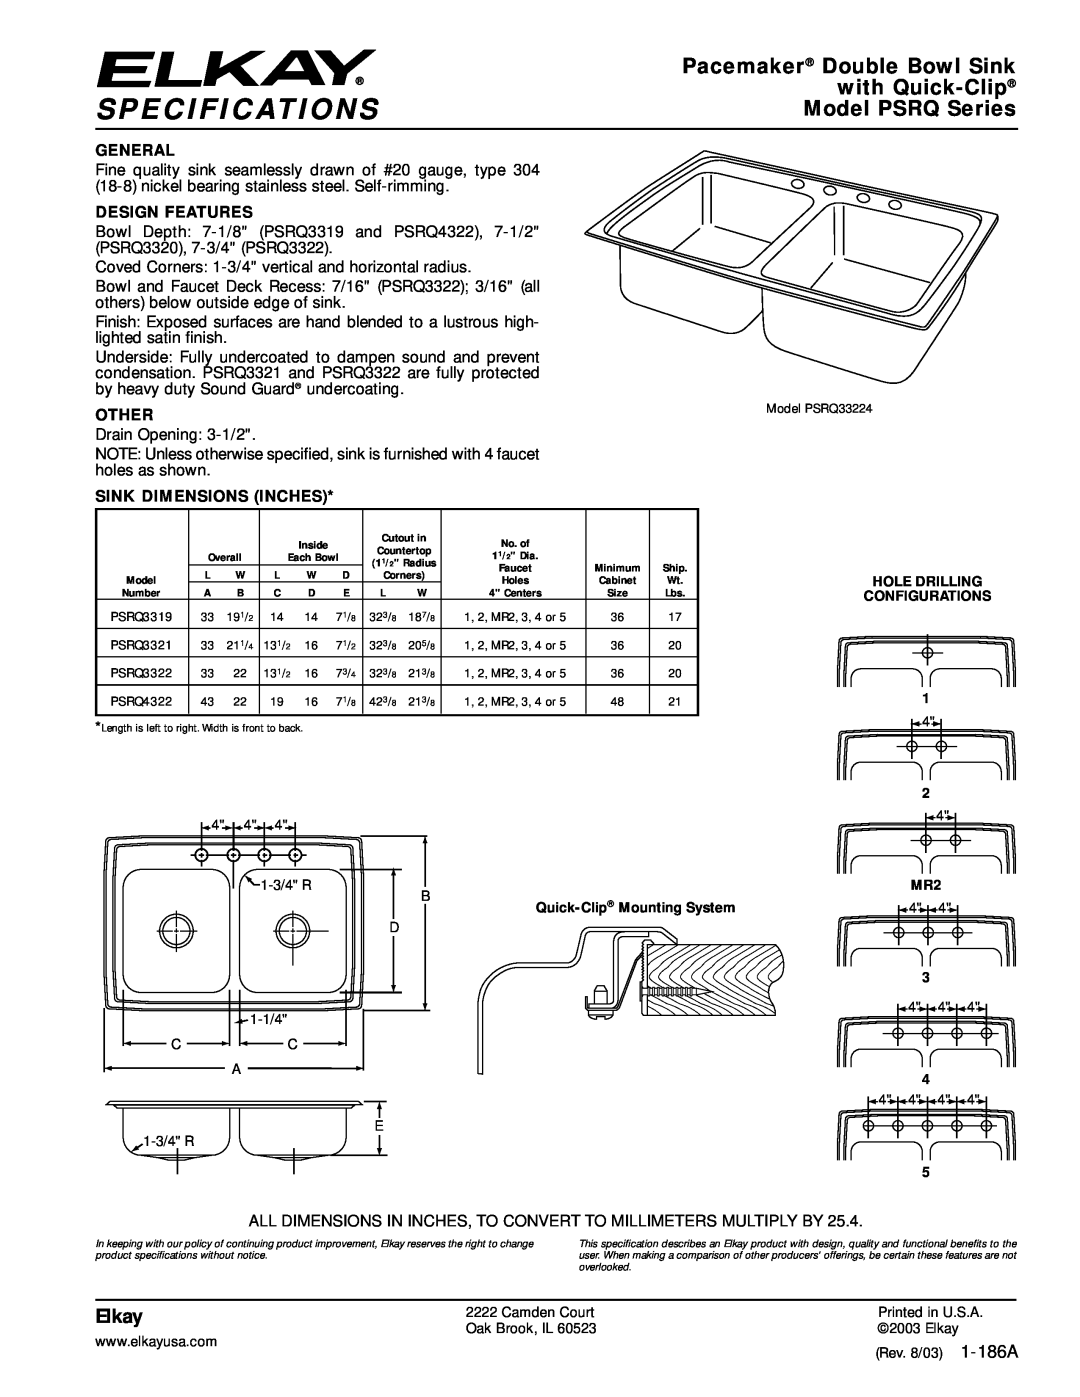 Elkay PSRQ3321 specifications Specifications, Pacemaker Double Bowl Sink, with Quick-Clip, Model PSRQ Series, Elkay, Other 